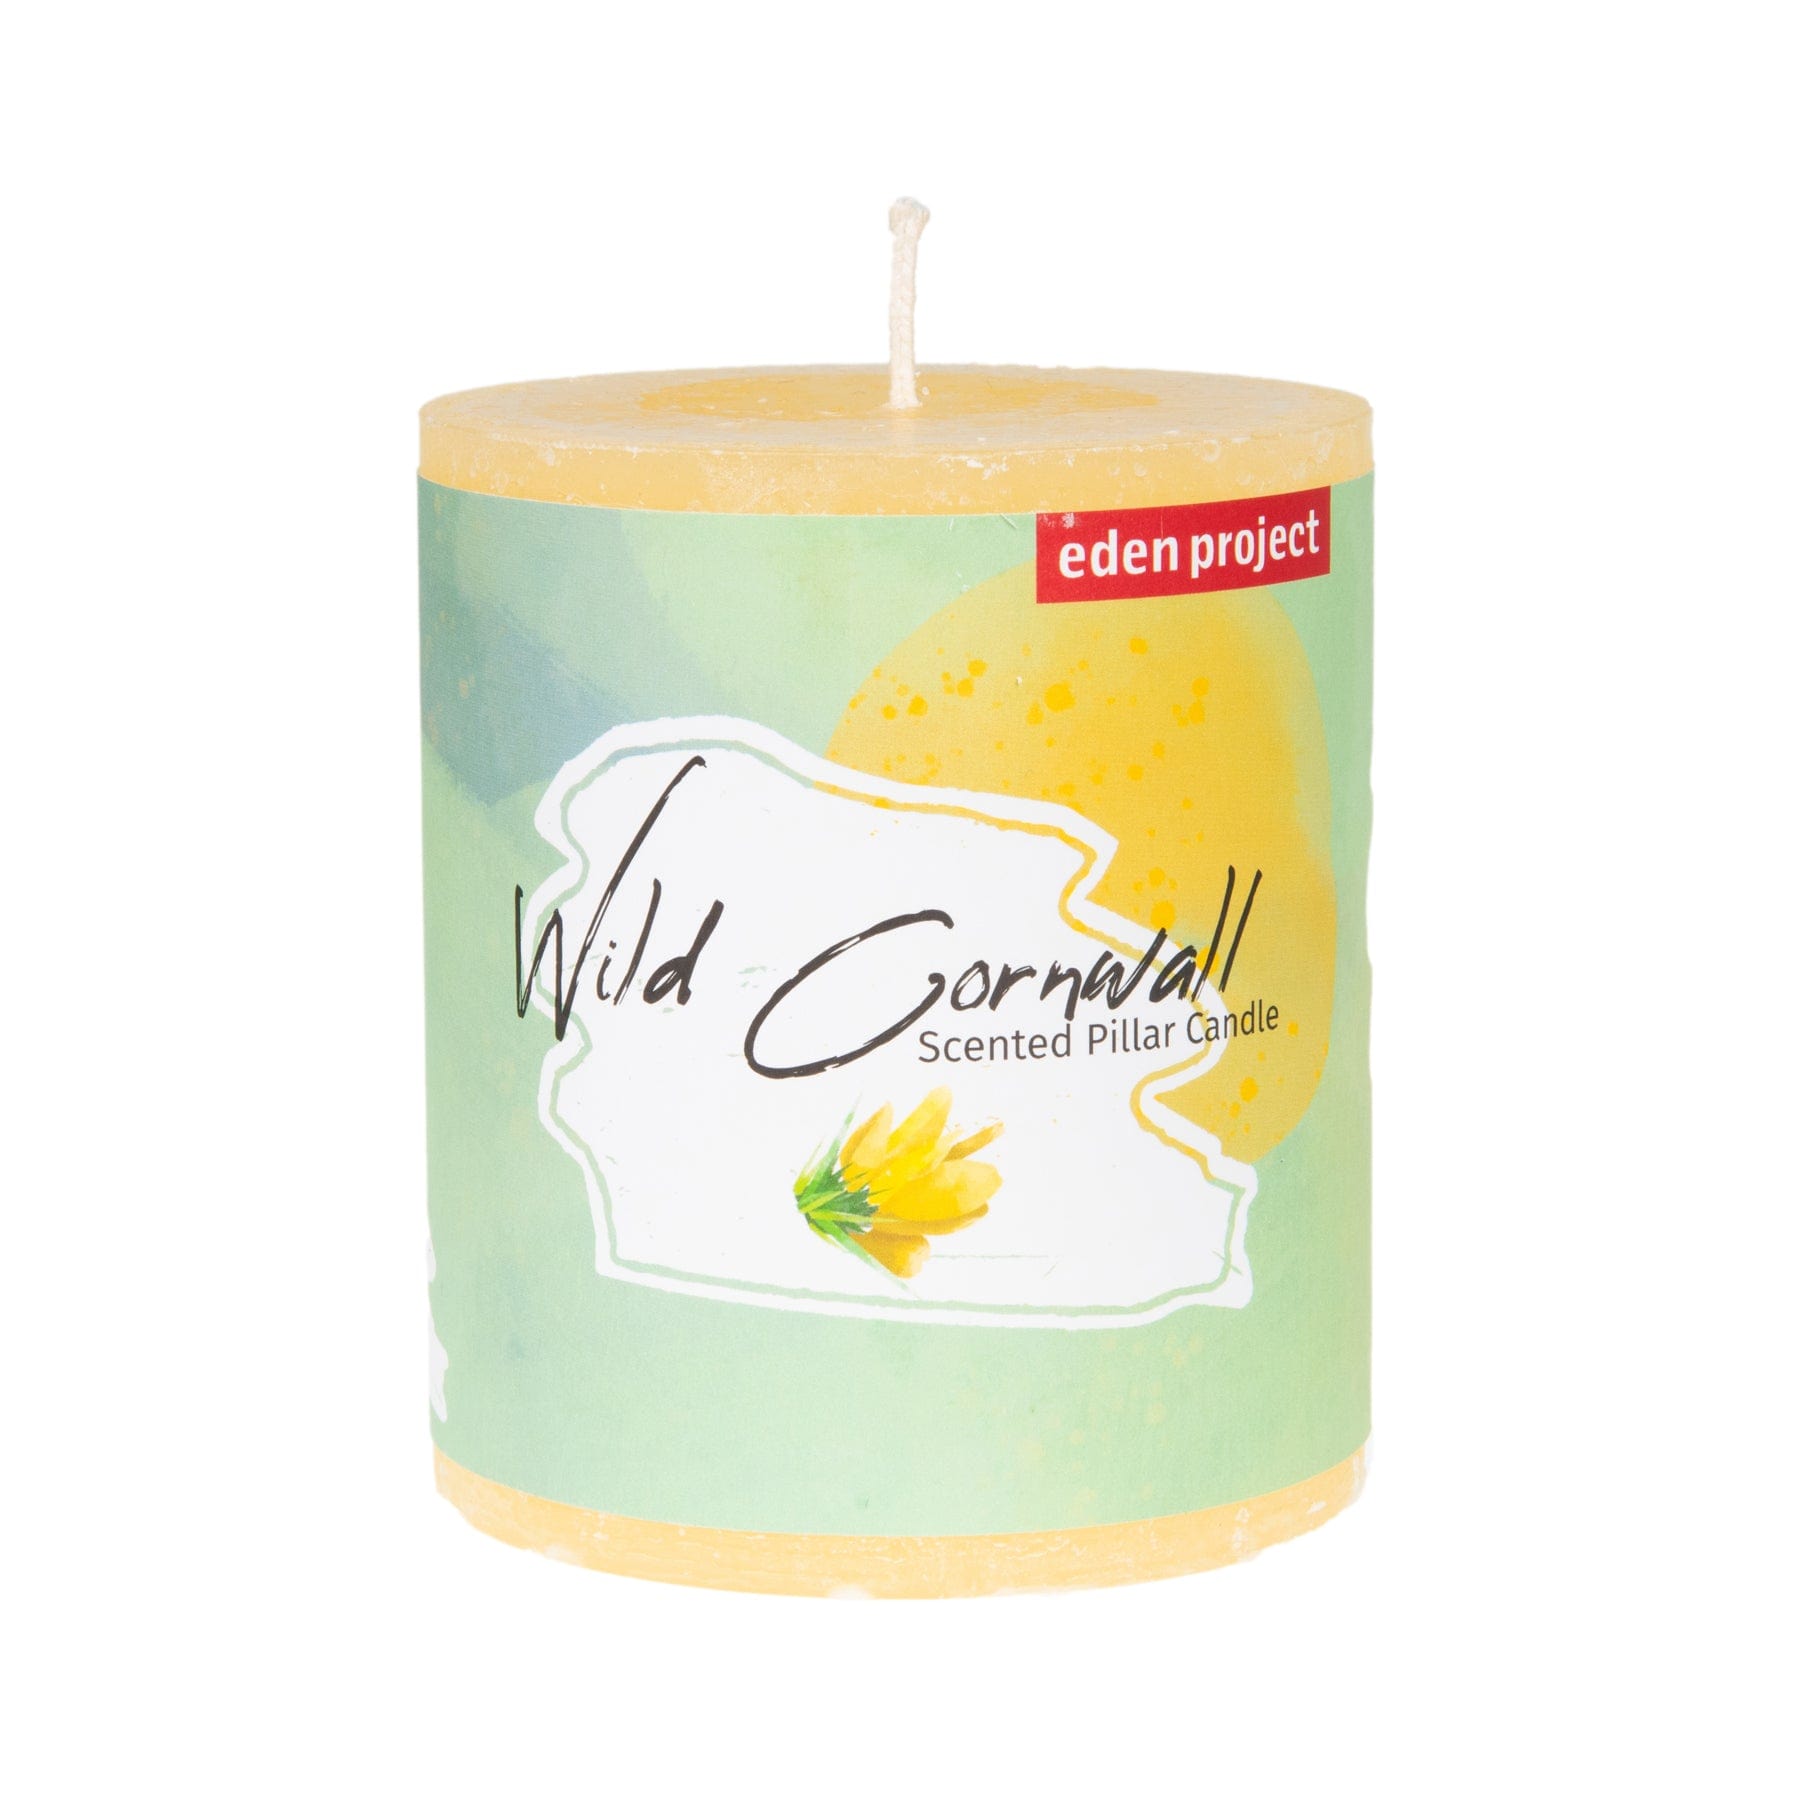 Eden Project Wild Cornwall scented pillar candle with yellow and green design